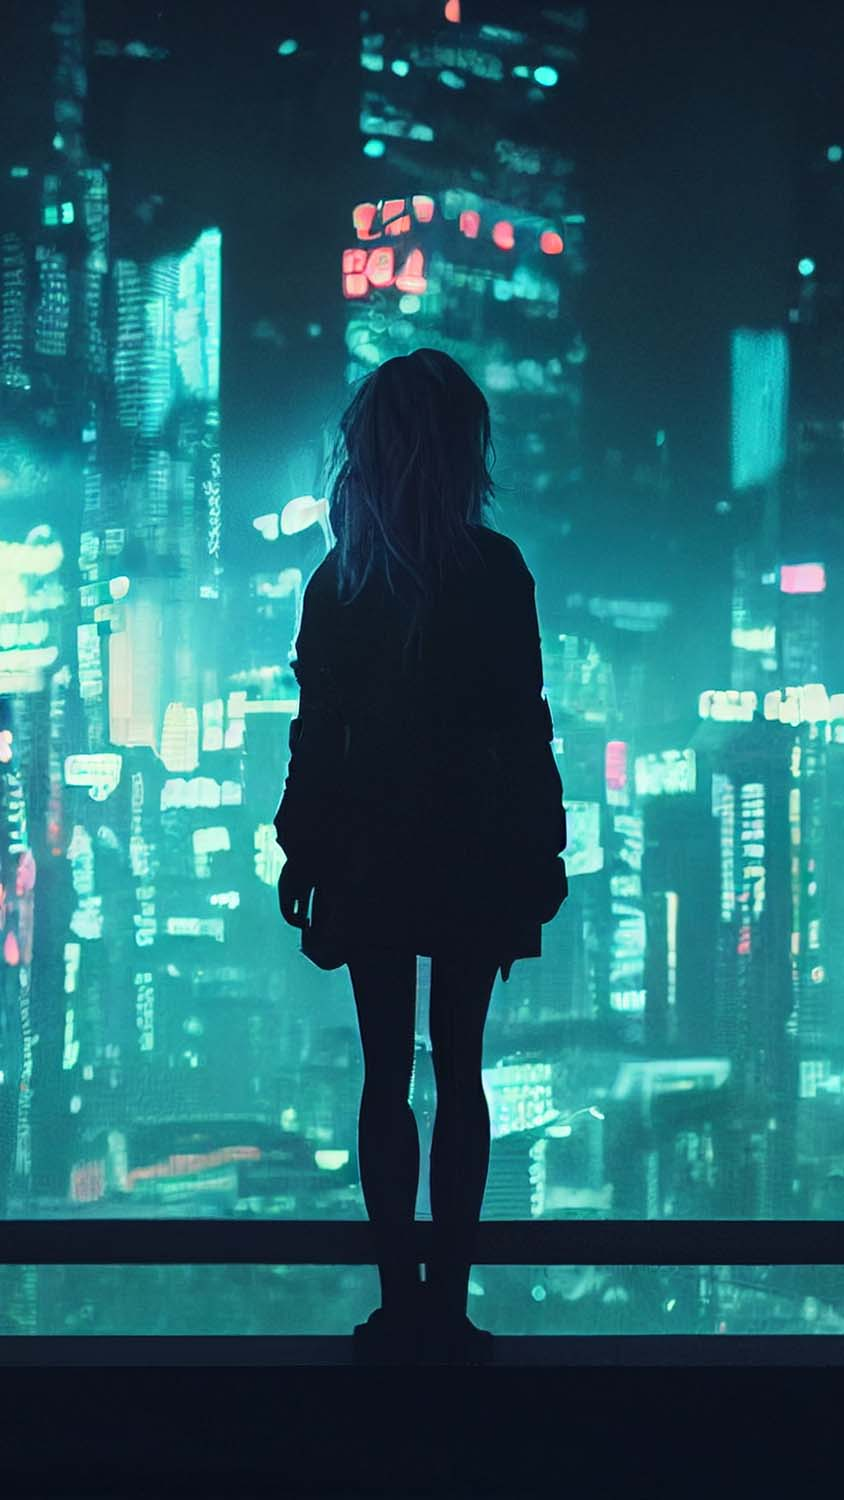 Alone Girl IPhone Wallpaper HD  IPhone Wallpapers